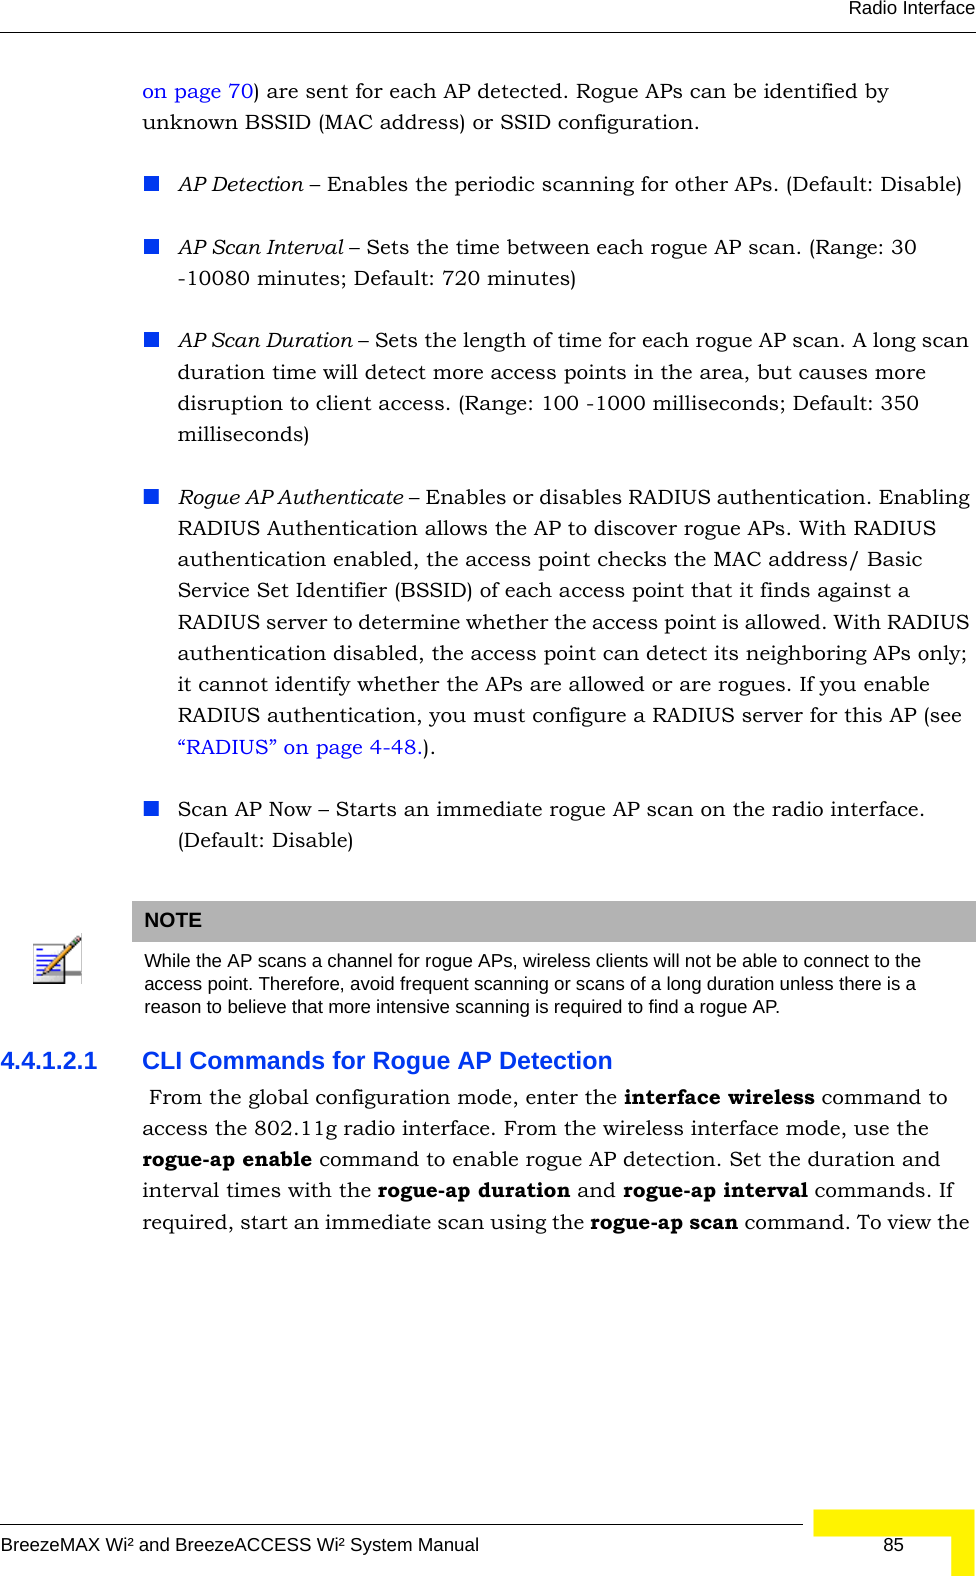 Radio InterfaceBreezeMAX Wi² and BreezeACCESS Wi² System Manual  85on page 70) are sent for each AP detected. Rogue APs can be identified by unknown BSSID (MAC address) or SSID configuration.AP Detection – Enables the periodic scanning for other APs. (Default: Disable)AP Scan Interval – Sets the time between each rogue AP scan. (Range: 30 -10080 minutes; Default: 720 minutes)AP Scan Duration – Sets the length of time for each rogue AP scan. A long scan duration time will detect more access points in the area, but causes more disruption to client access. (Range: 100 -1000 milliseconds; Default: 350 milliseconds)Rogue AP Authenticate – Enables or disables RADIUS authentication. Enabling RADIUS Authentication allows the AP to discover rogue APs. With RADIUS authentication enabled, the access point checks the MAC address/ Basic Service Set Identifier (BSSID) of each access point that it finds against a RADIUS server to determine whether the access point is allowed. With RADIUS authentication disabled, the access point can detect its neighboring APs only; it cannot identify whether the APs are allowed or are rogues. If you enable RADIUS authentication, you must configure a RADIUS server for this AP (see  “RADIUS” on page 4-48.).Scan AP Now – Starts an immediate rogue AP scan on the radio interface. (Default: Disable)4.4.1.2.1 CLI Commands for Rogue AP Detection  From the global configuration mode, enter the interface wireless command to access the 802.11g radio interface. From the wireless interface mode, use the rogue-ap enable command to enable rogue AP detection. Set the duration and interval times with the rogue-ap duration and rogue-ap interval commands. If required, start an immediate scan using the rogue-ap scan command. To view the NOTEWhile the AP scans a channel for rogue APs, wireless clients will not be able to connect to the access point. Therefore, avoid frequent scanning or scans of a long duration unless there is a reason to believe that more intensive scanning is required to find a rogue AP.